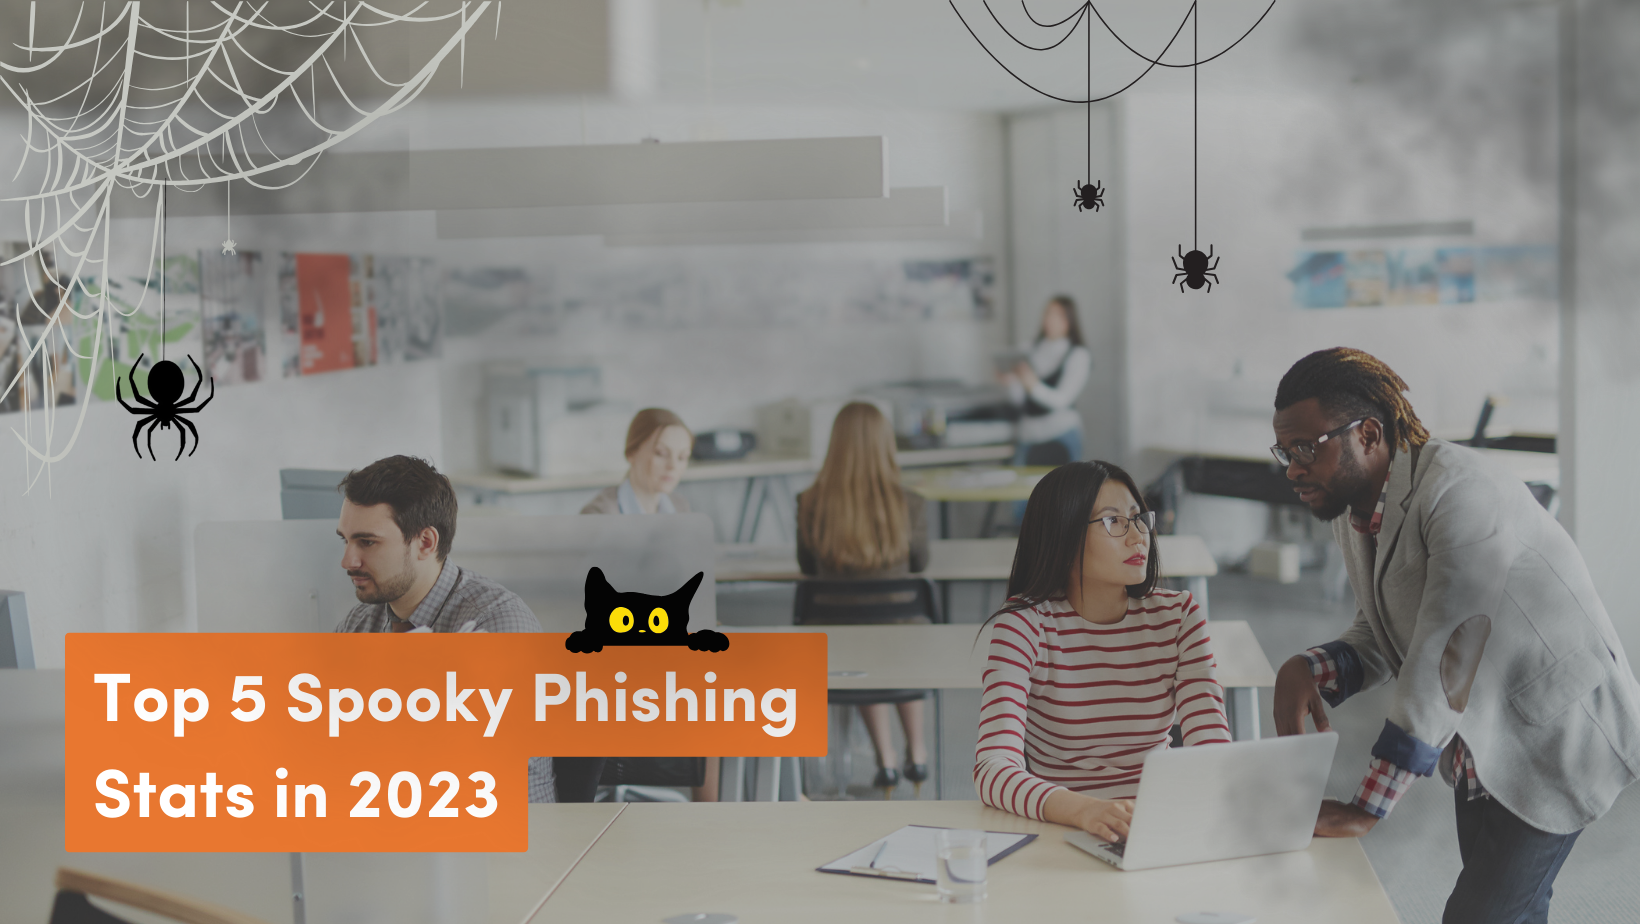 Featured image: People in office working amidst phishing threats - Read full post: Spooky Phishing Trends Haunting the Cyberworld This Halloween